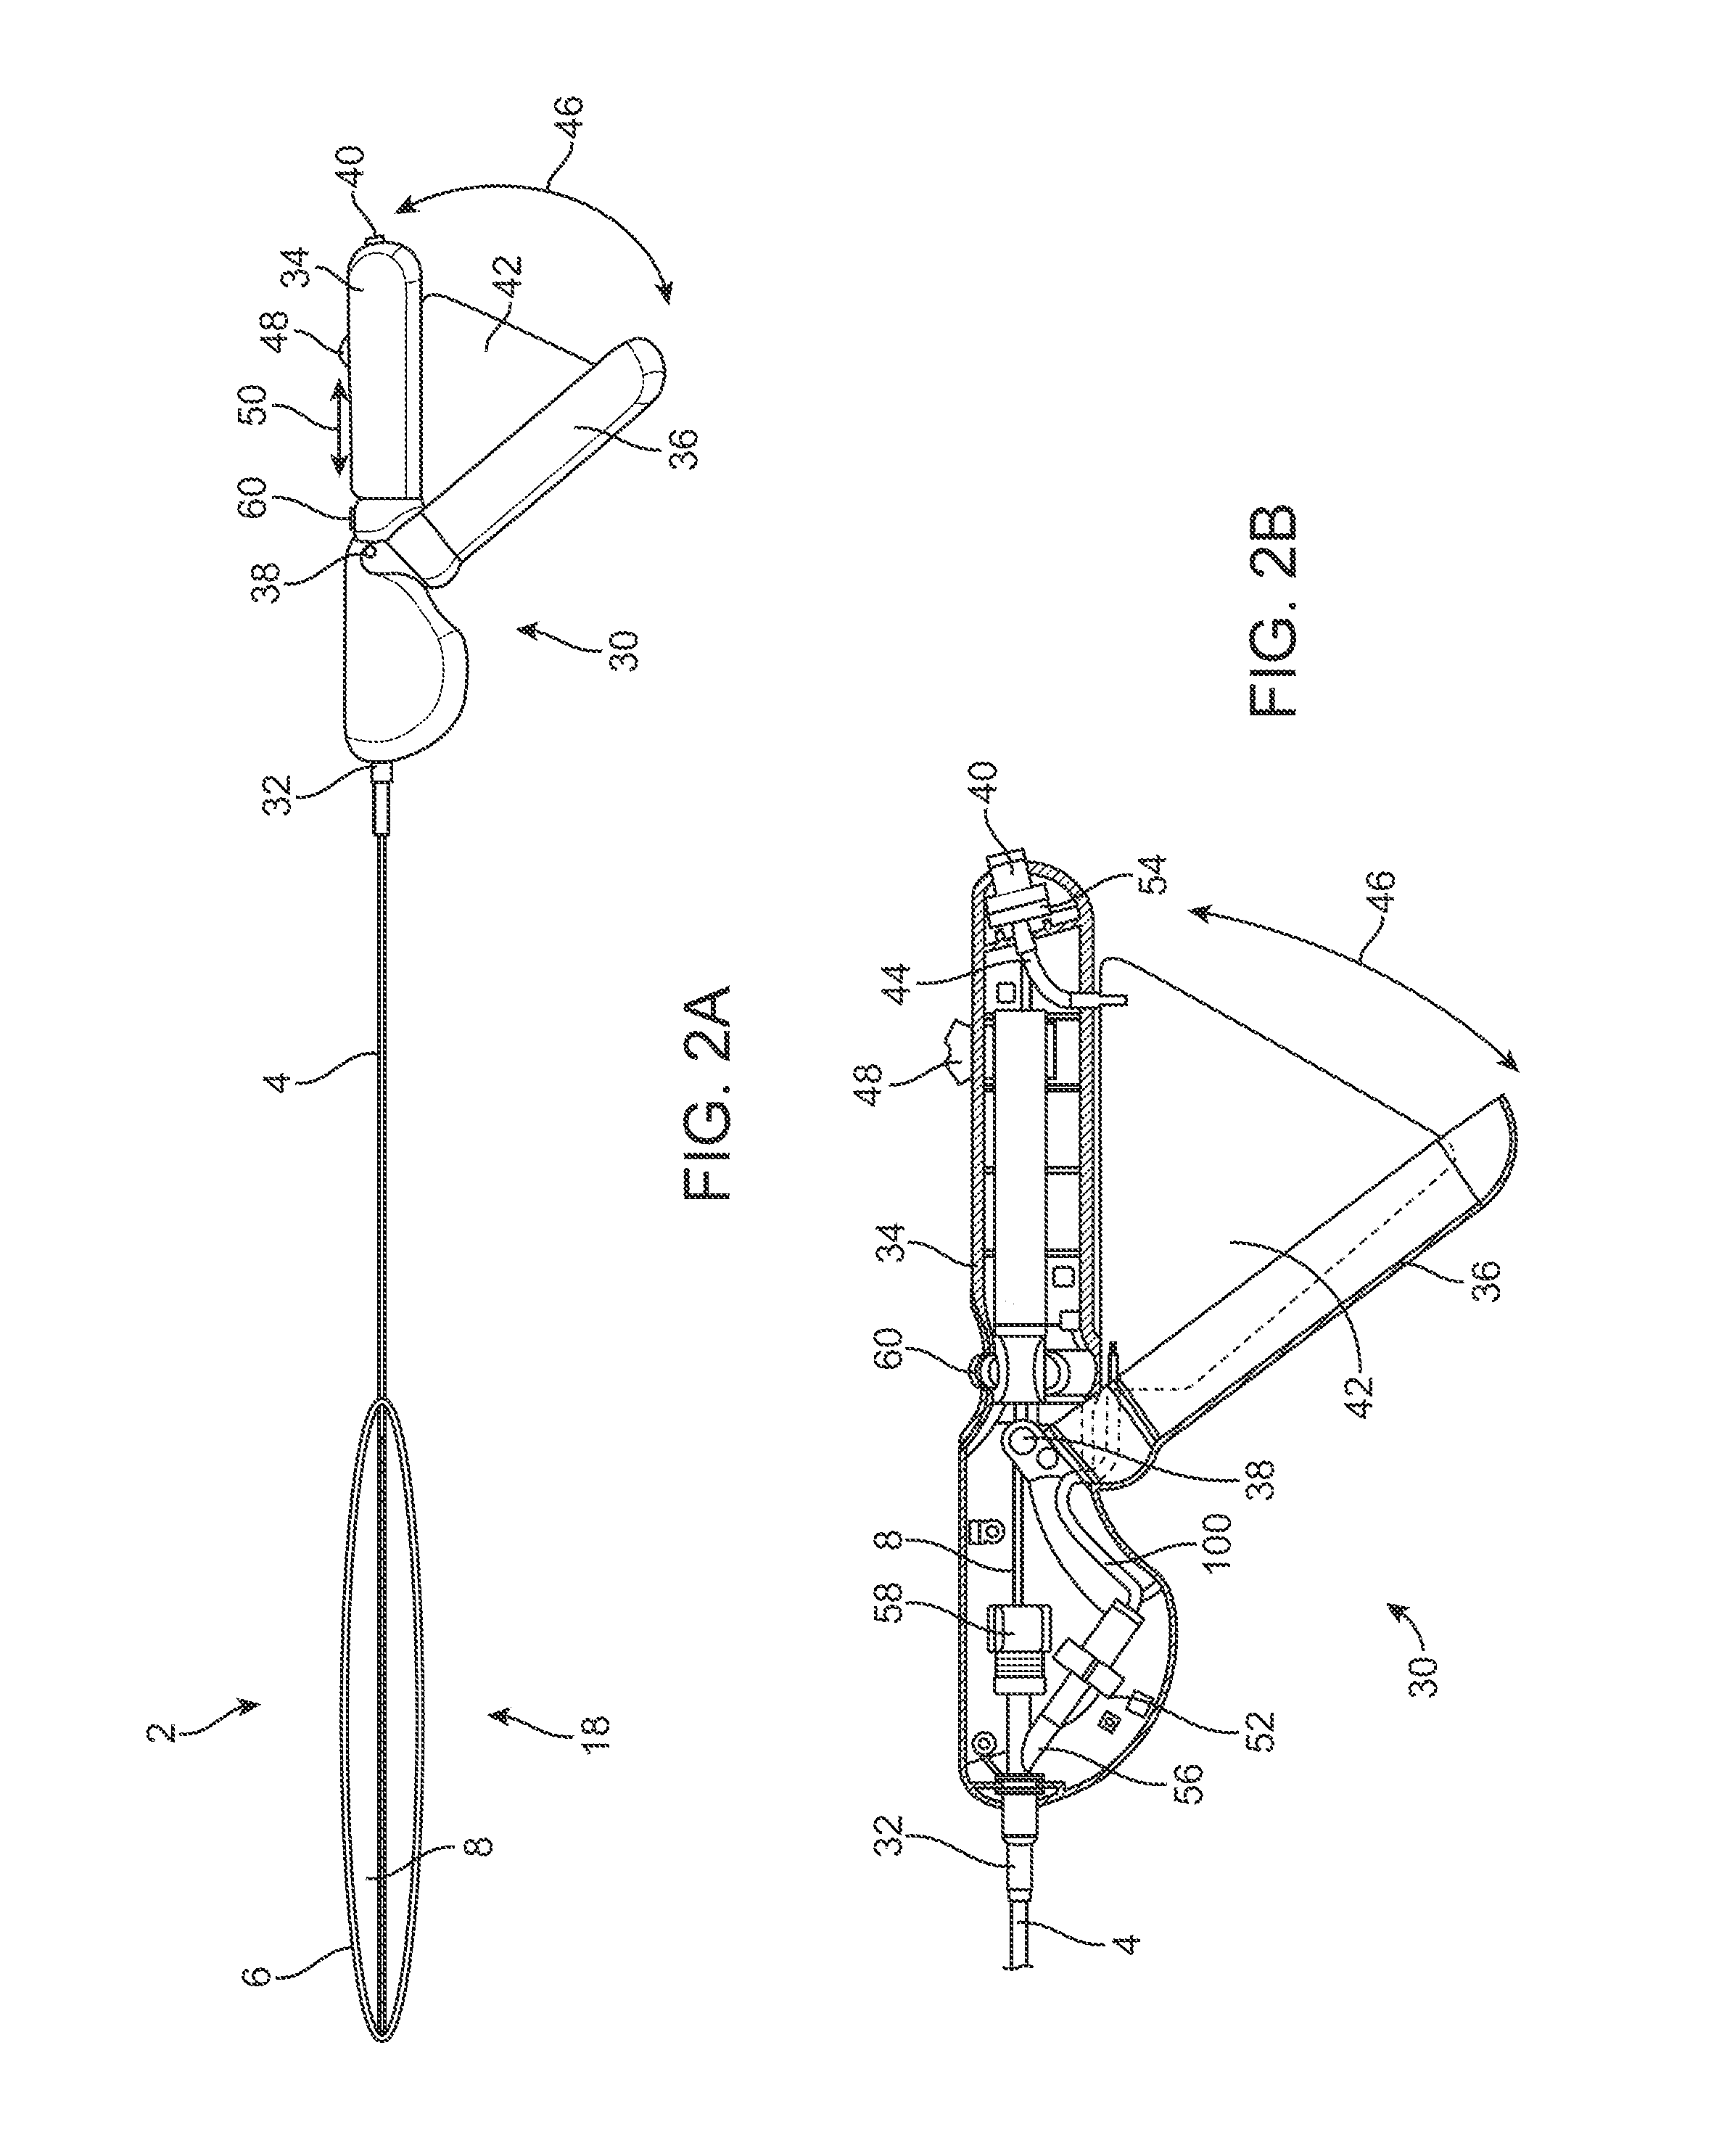 Apparatus and methods for accessing and sealing bodily vessels and cavities